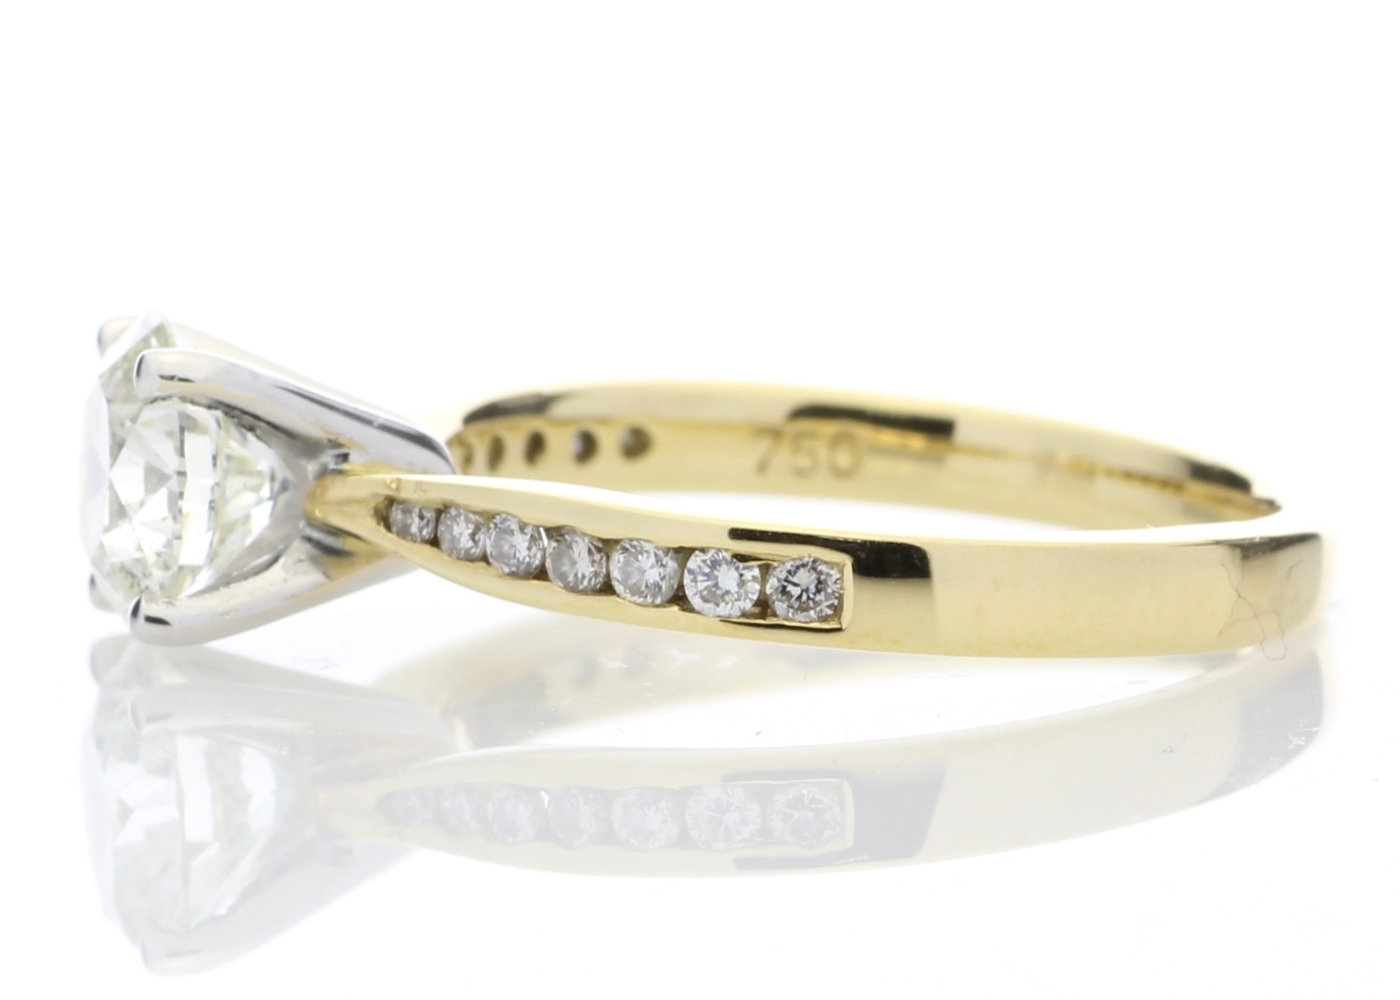 18ct Yellow Gold Single Stone Diamond Ring With Stone Set Shoulders (1.11) 1.28 Carats - Image 3 of 5